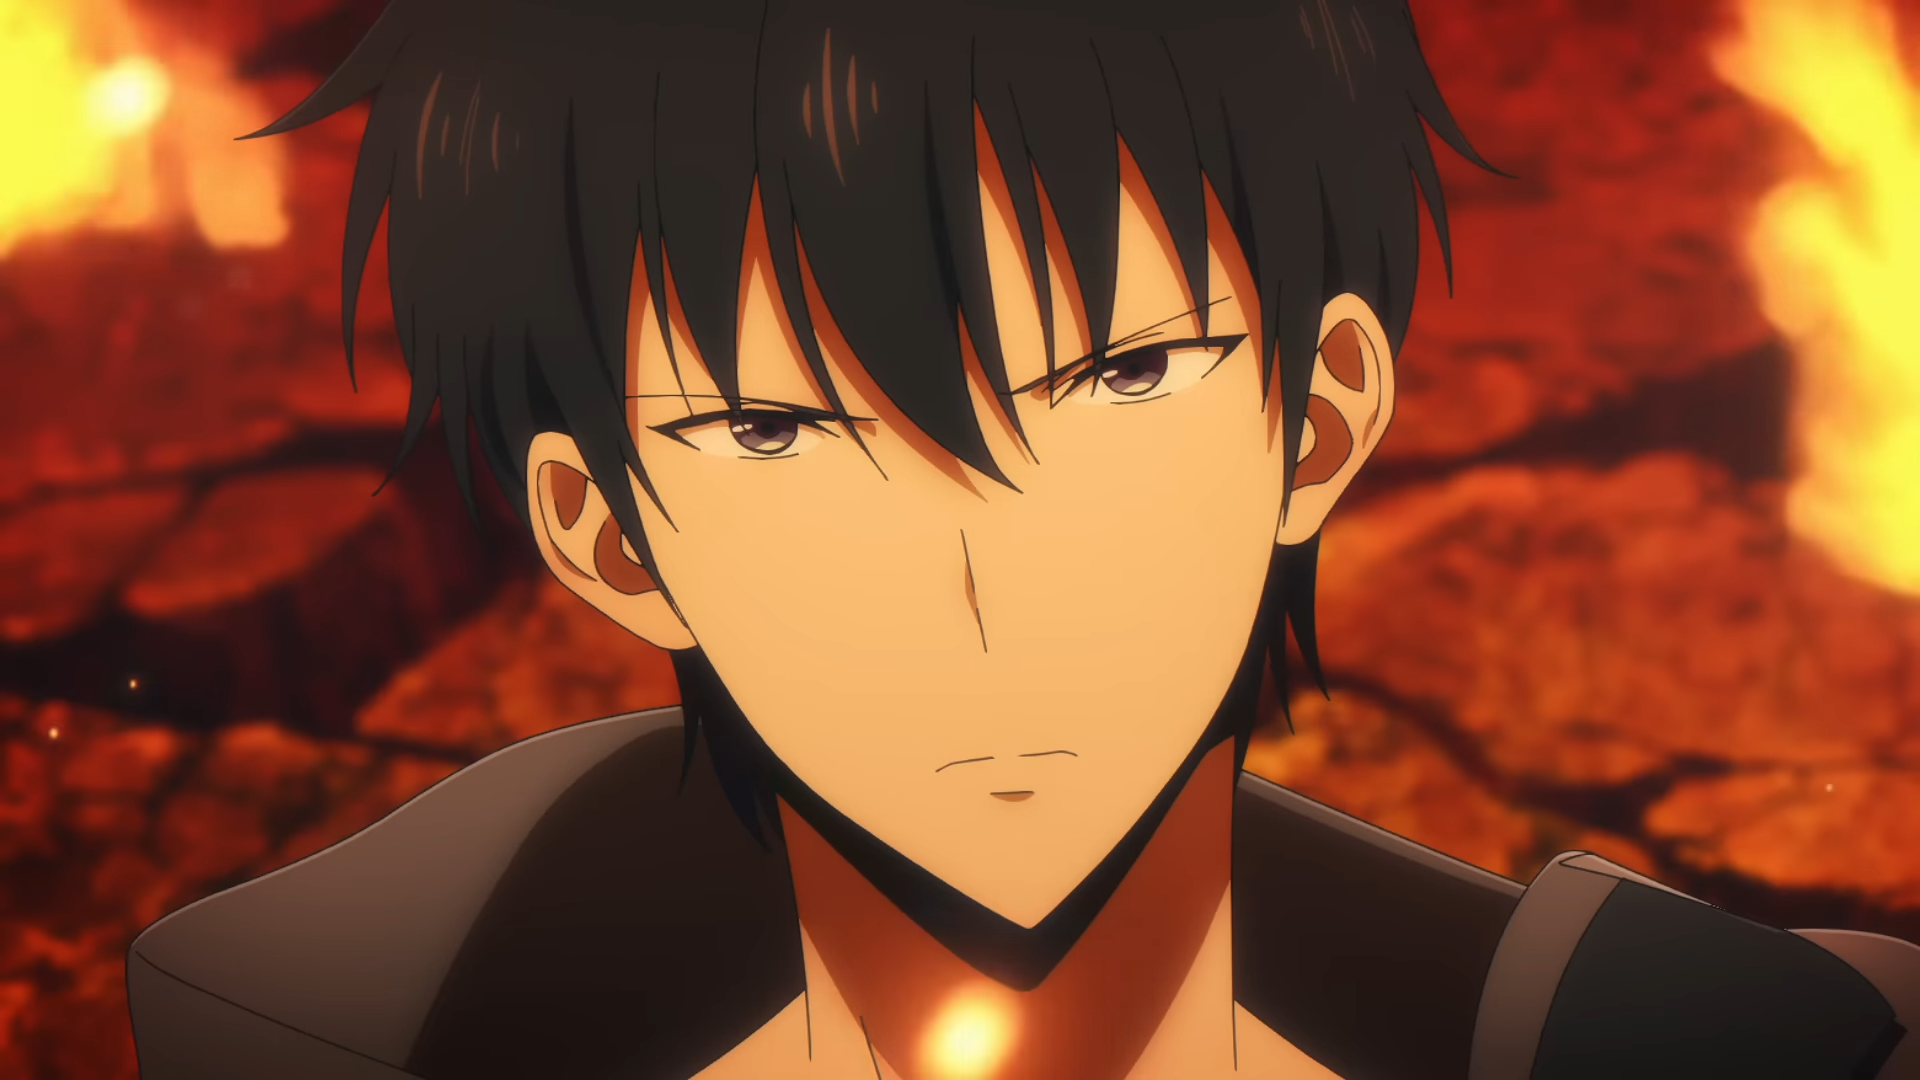 Anime Corner - Fire Force Season 2 officially ended